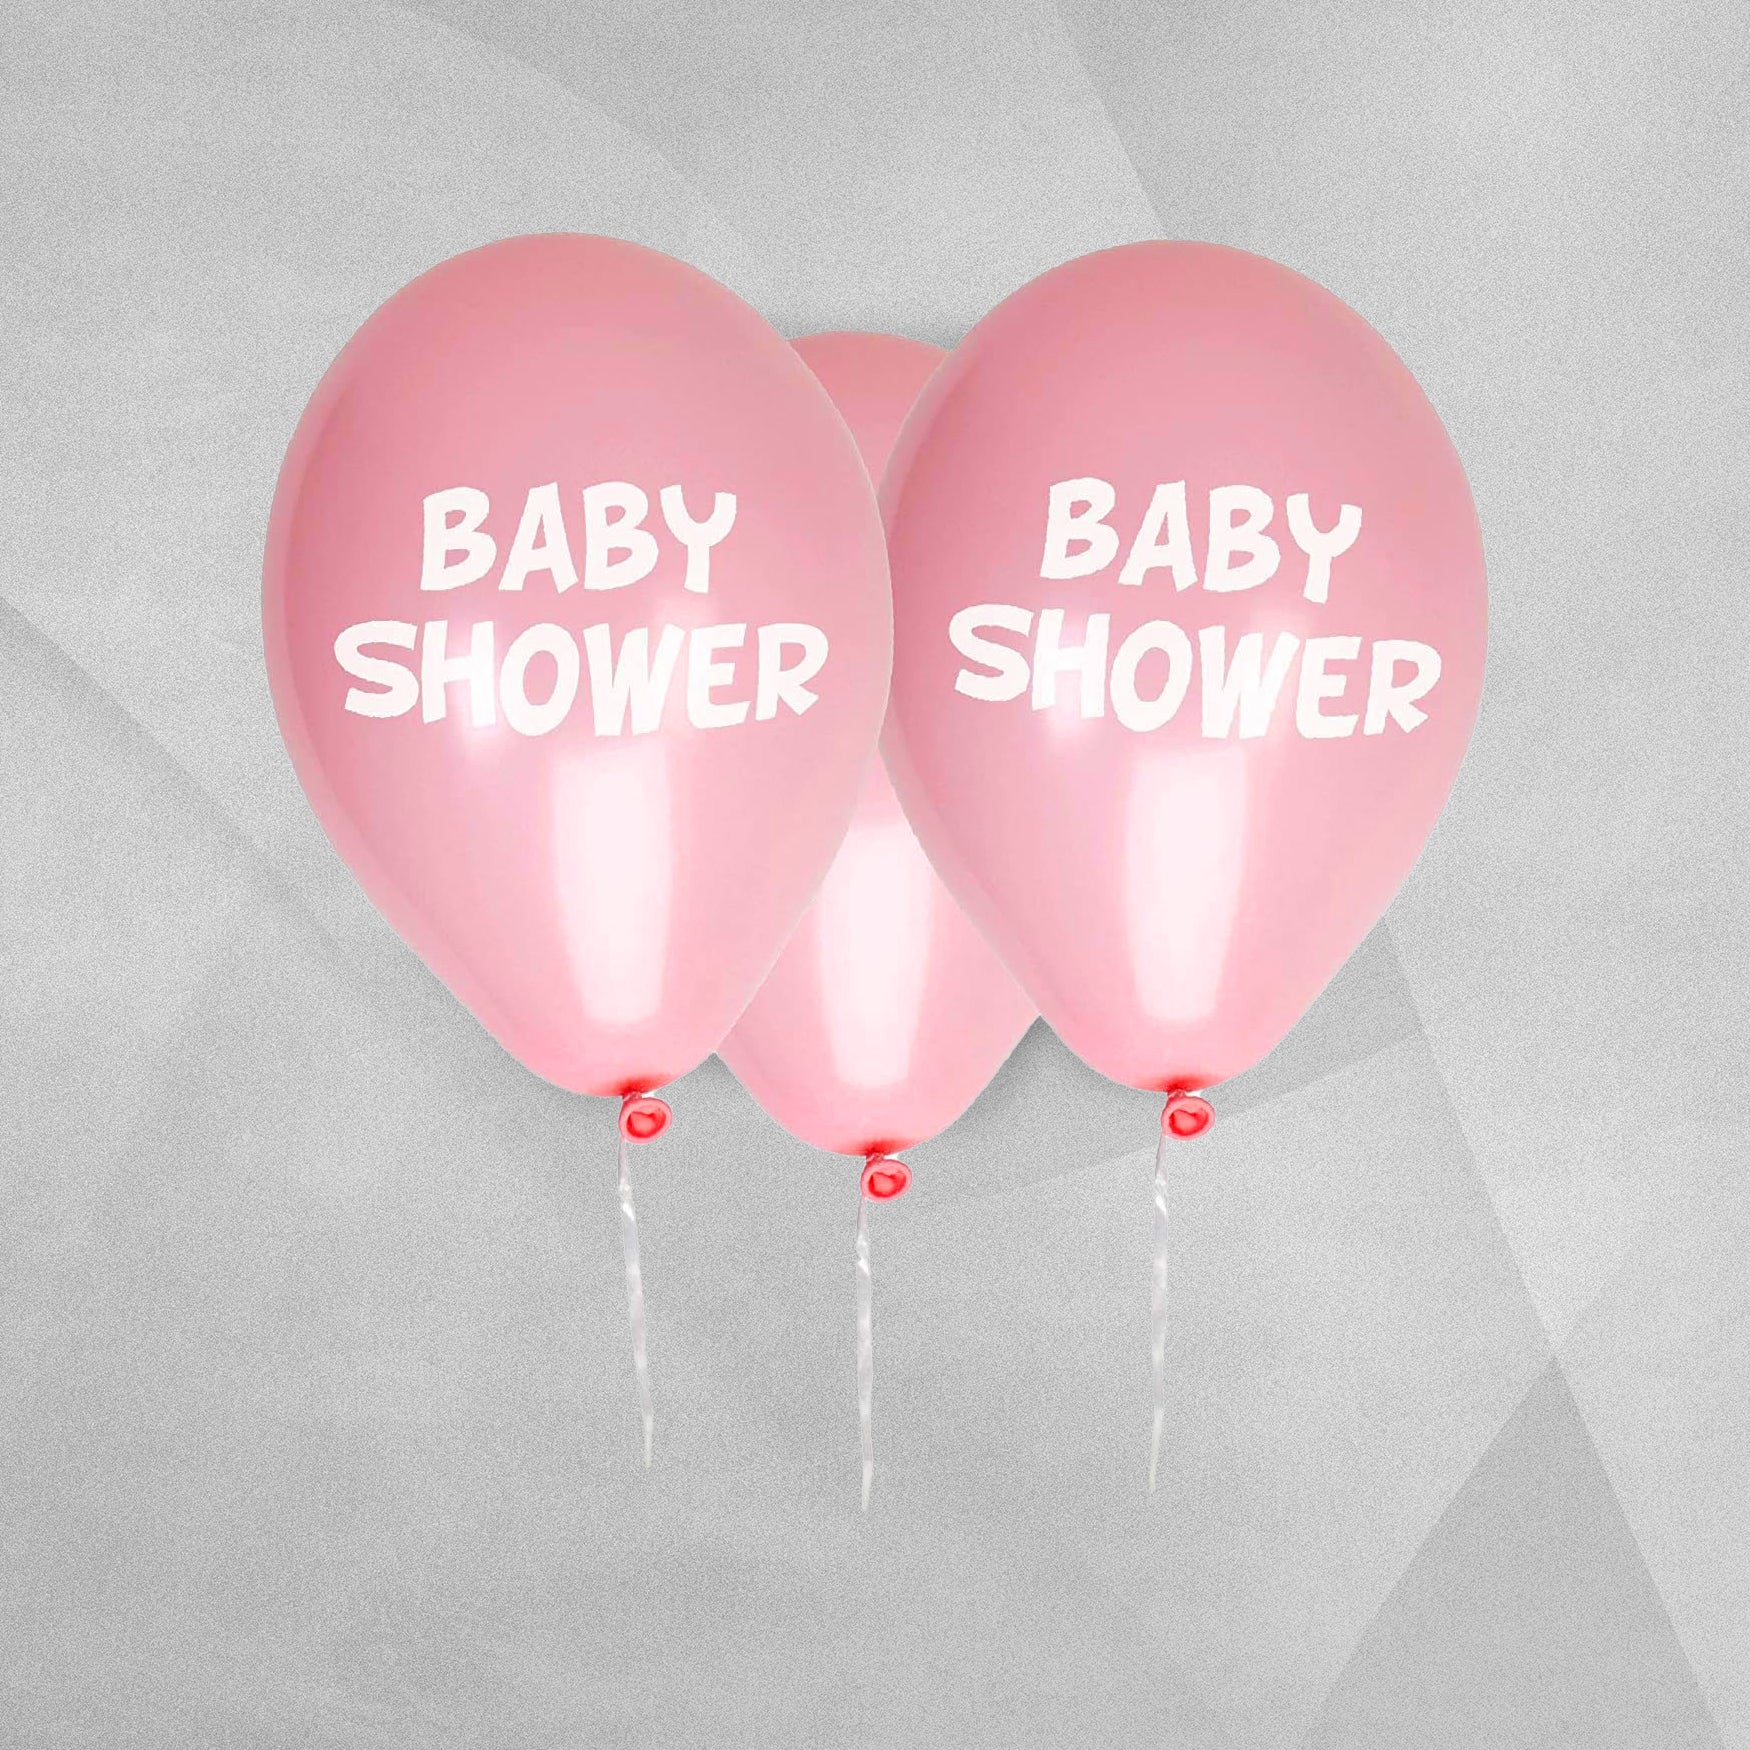 Baby Shower Balloons - Pink - Pack of 8